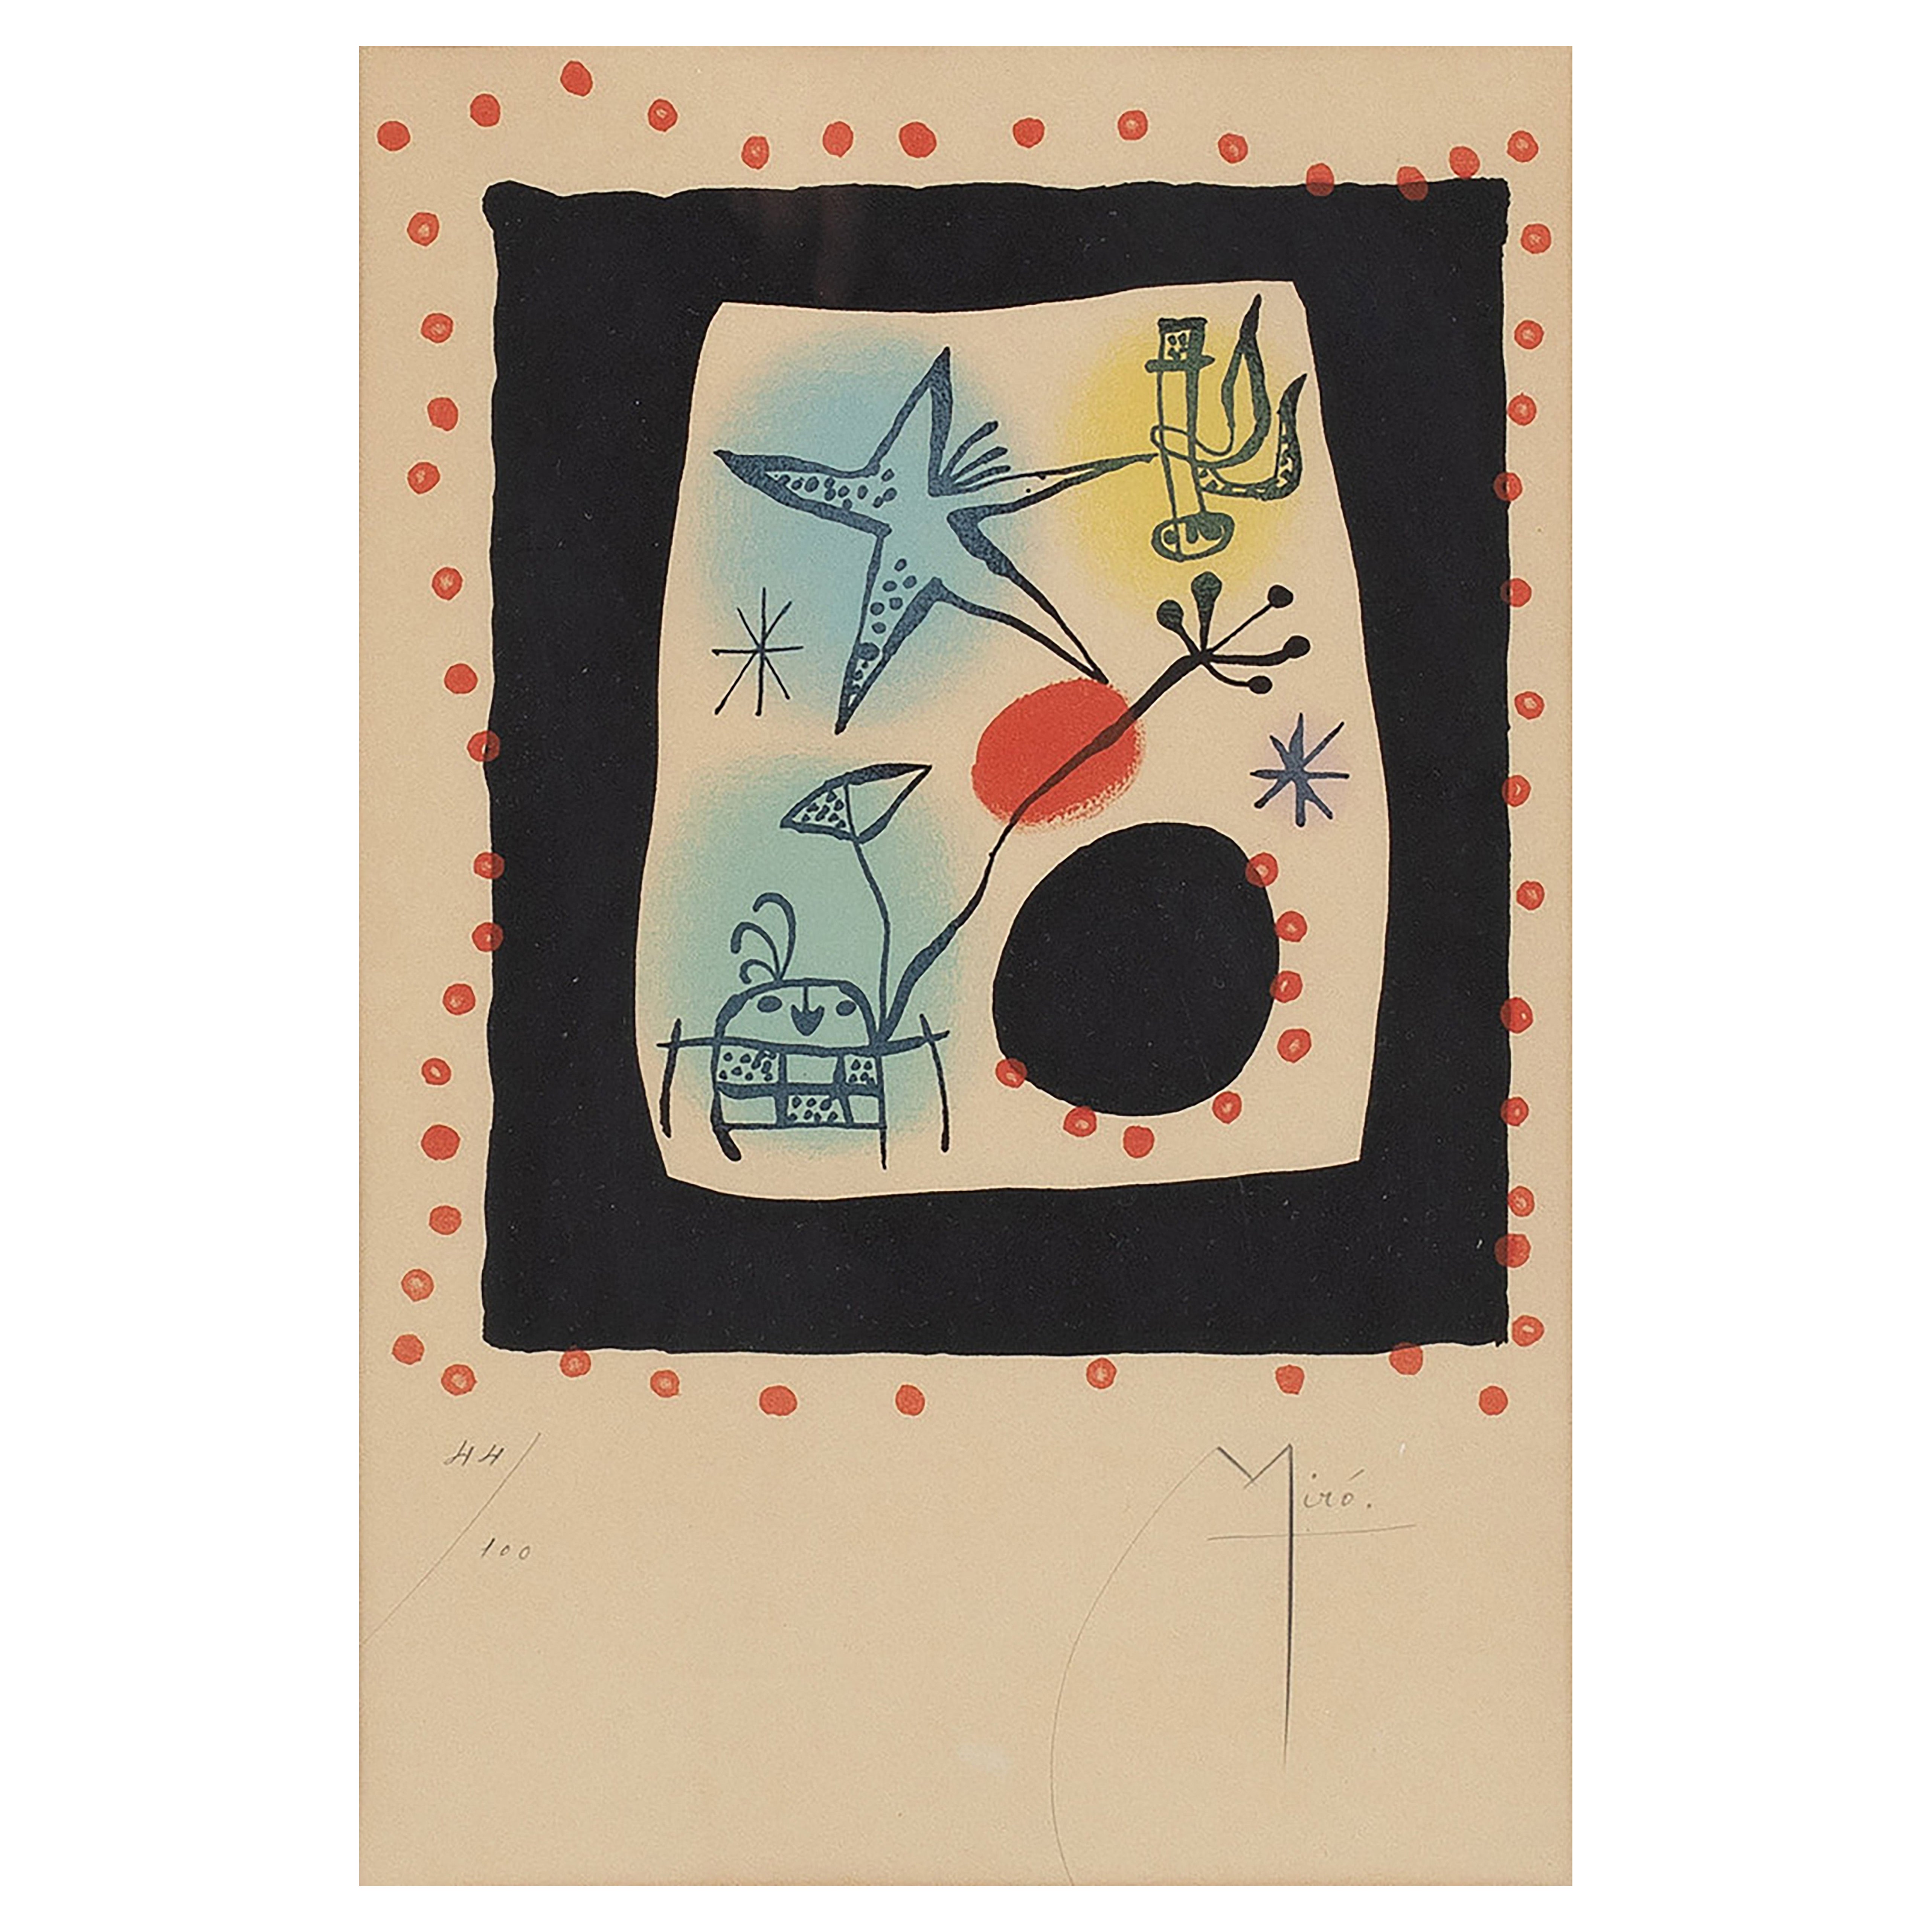 Color lithograph, 1960, signed in pencil 44/100, printed and published by Maeght, Paris. Measures leaf size 25 x 38 cm (Arches). Frame 44x57cm